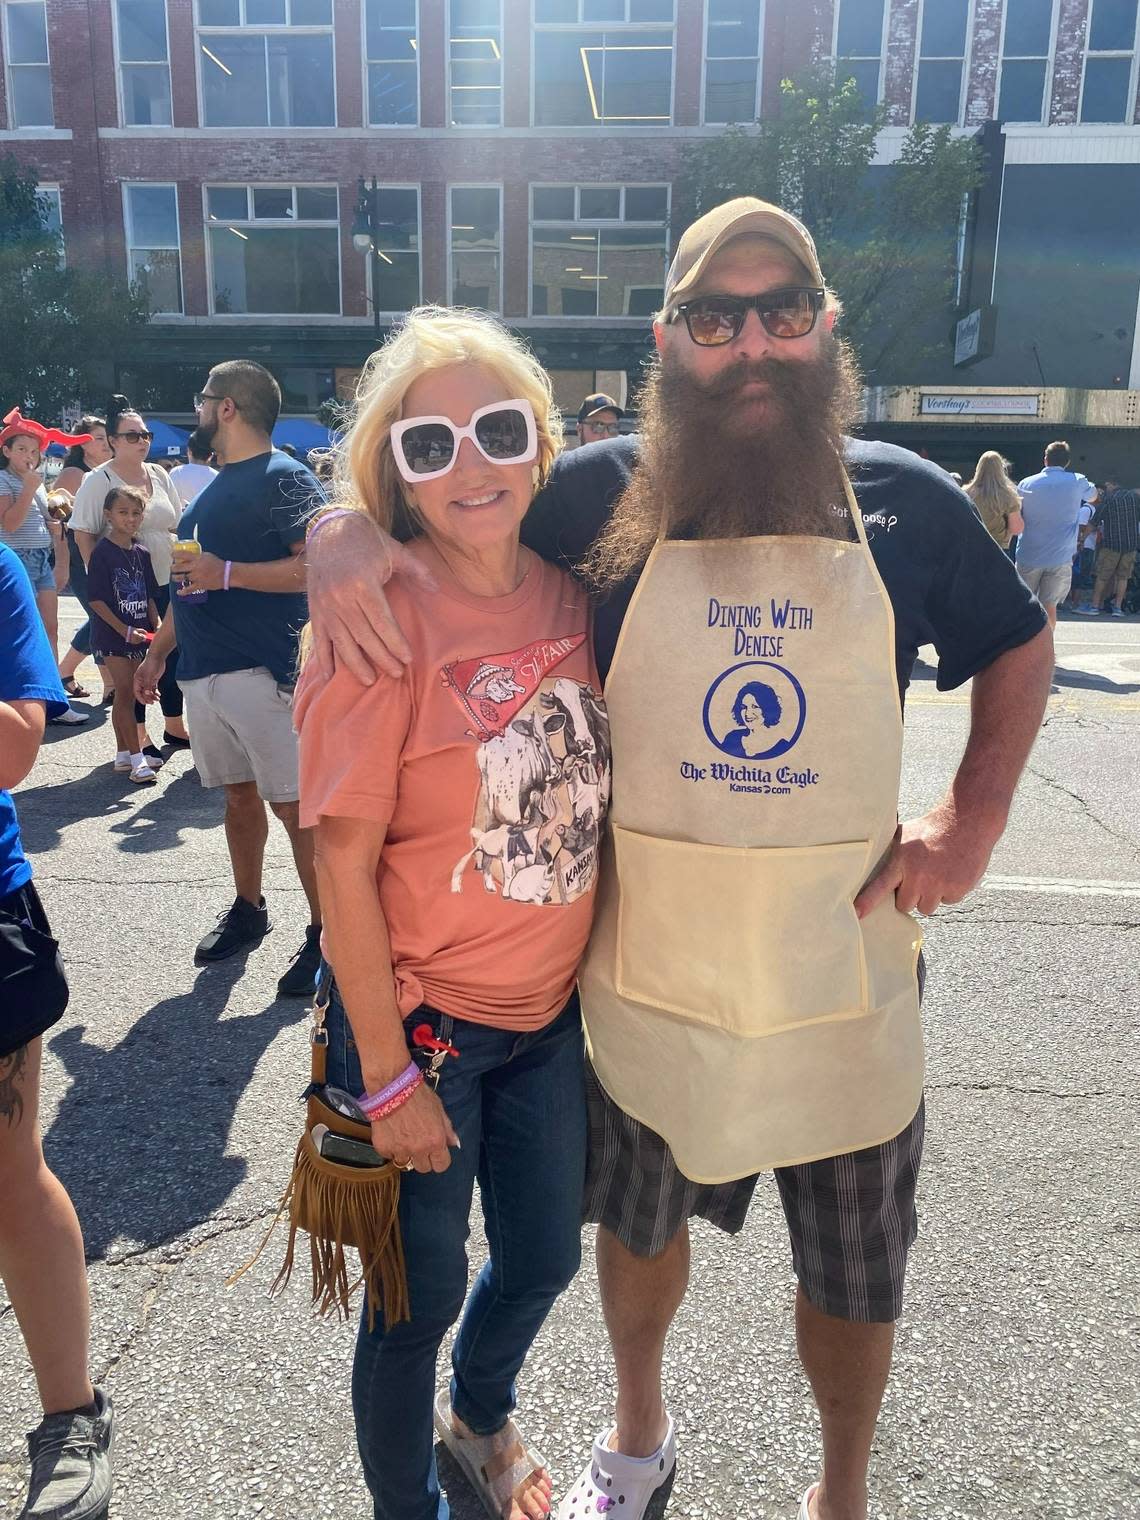 This fine gentleman saved his circa-2019 Dining with Denise apron and says he wears it to the chili festival every year to protect his clothing.